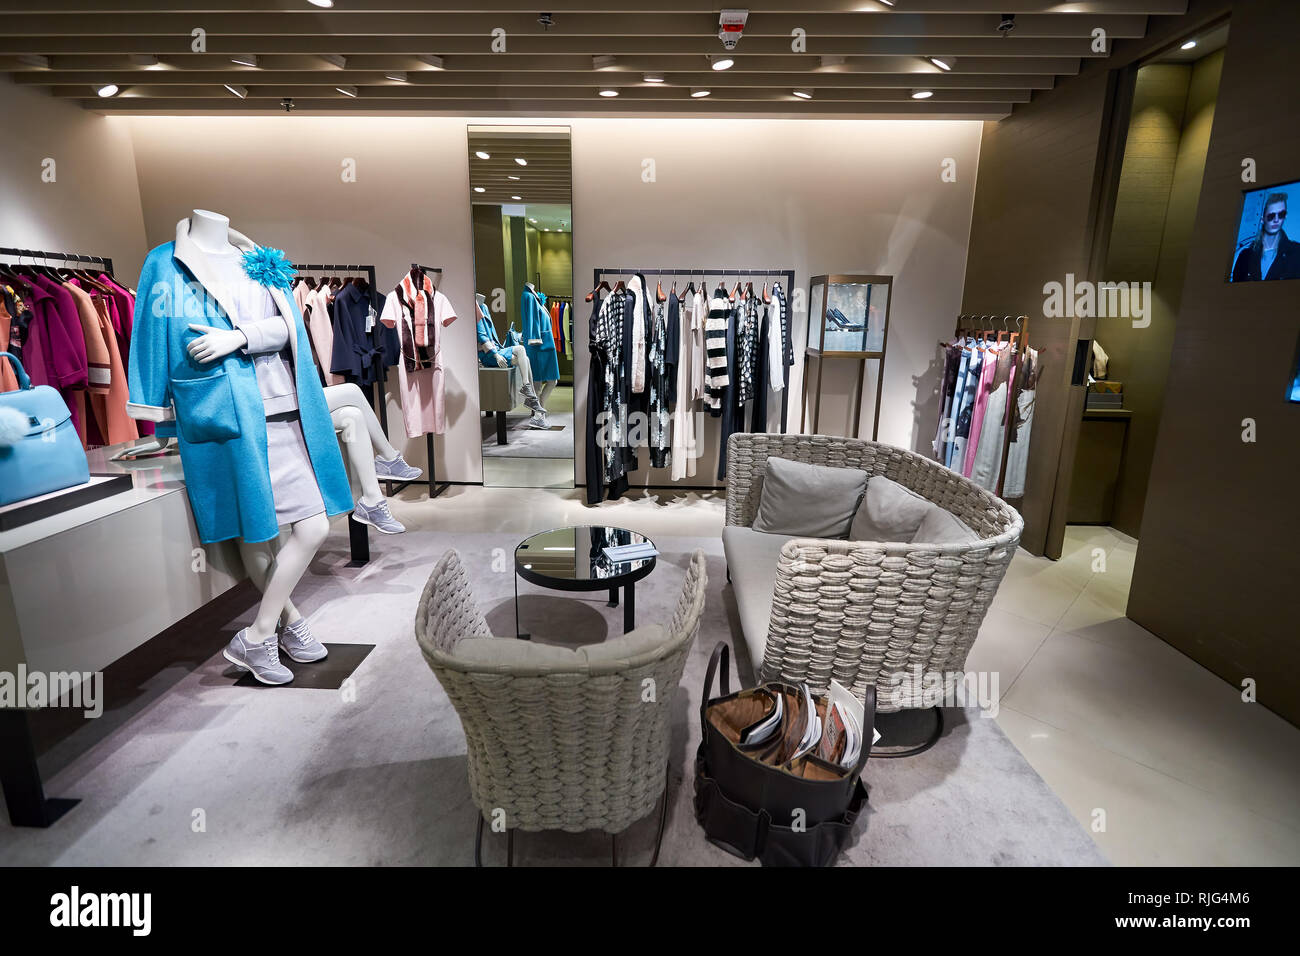 HONG KONG - JANUARY 26, 2016: inside of Max Mara store at Elements Shopping  Mall. Max Mara is a luxury Italian fashion house belonging to the group of  Stock Photo - Alamy